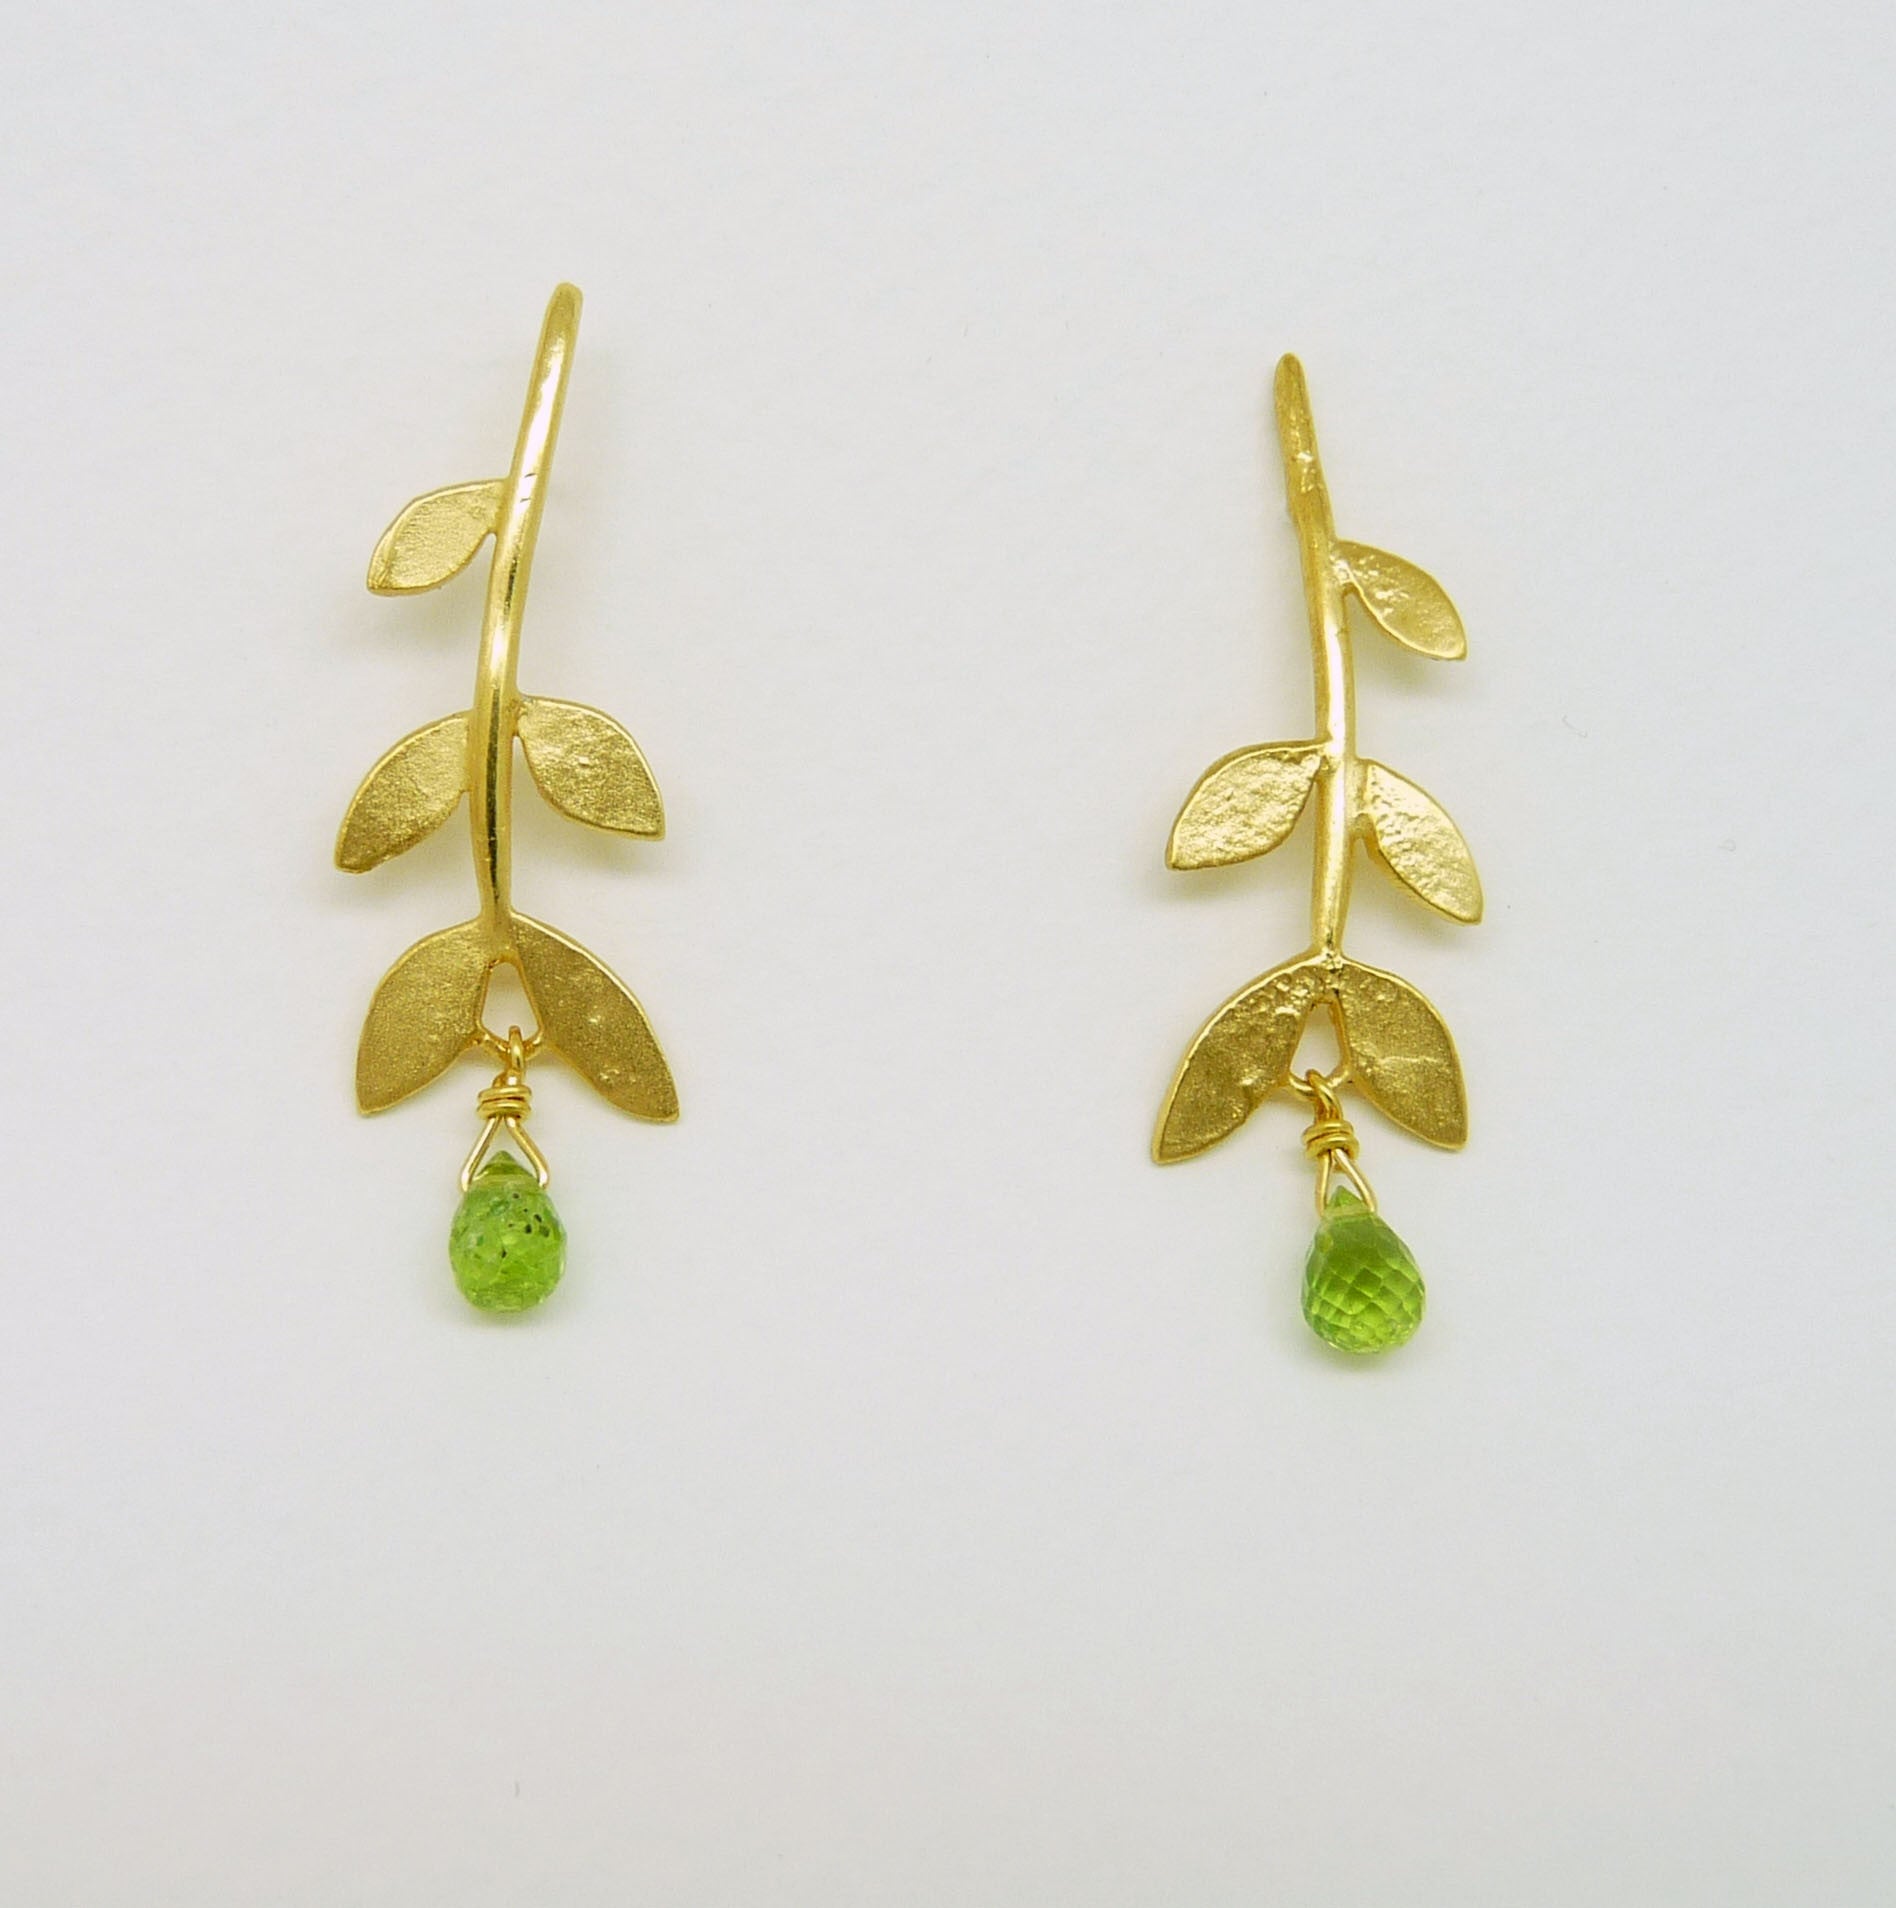 Blossoming, branch, jewellery, jewelry, earrings, studs, sterling, silver, 18ct, gold, nature, natural, garnet, peridot, turquoise